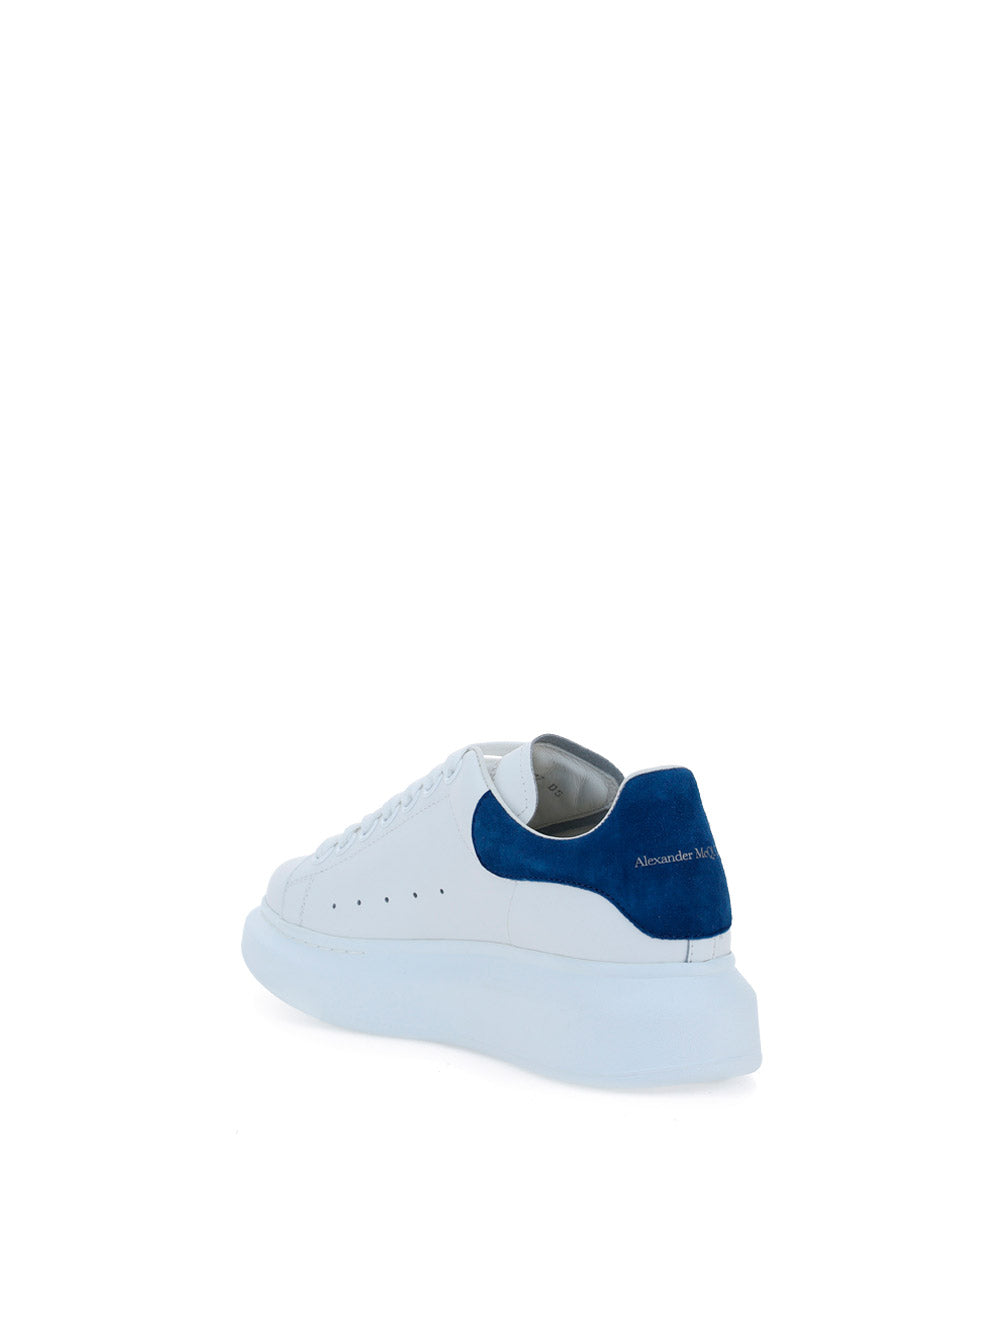 Oversized Sneakers - White / Blue